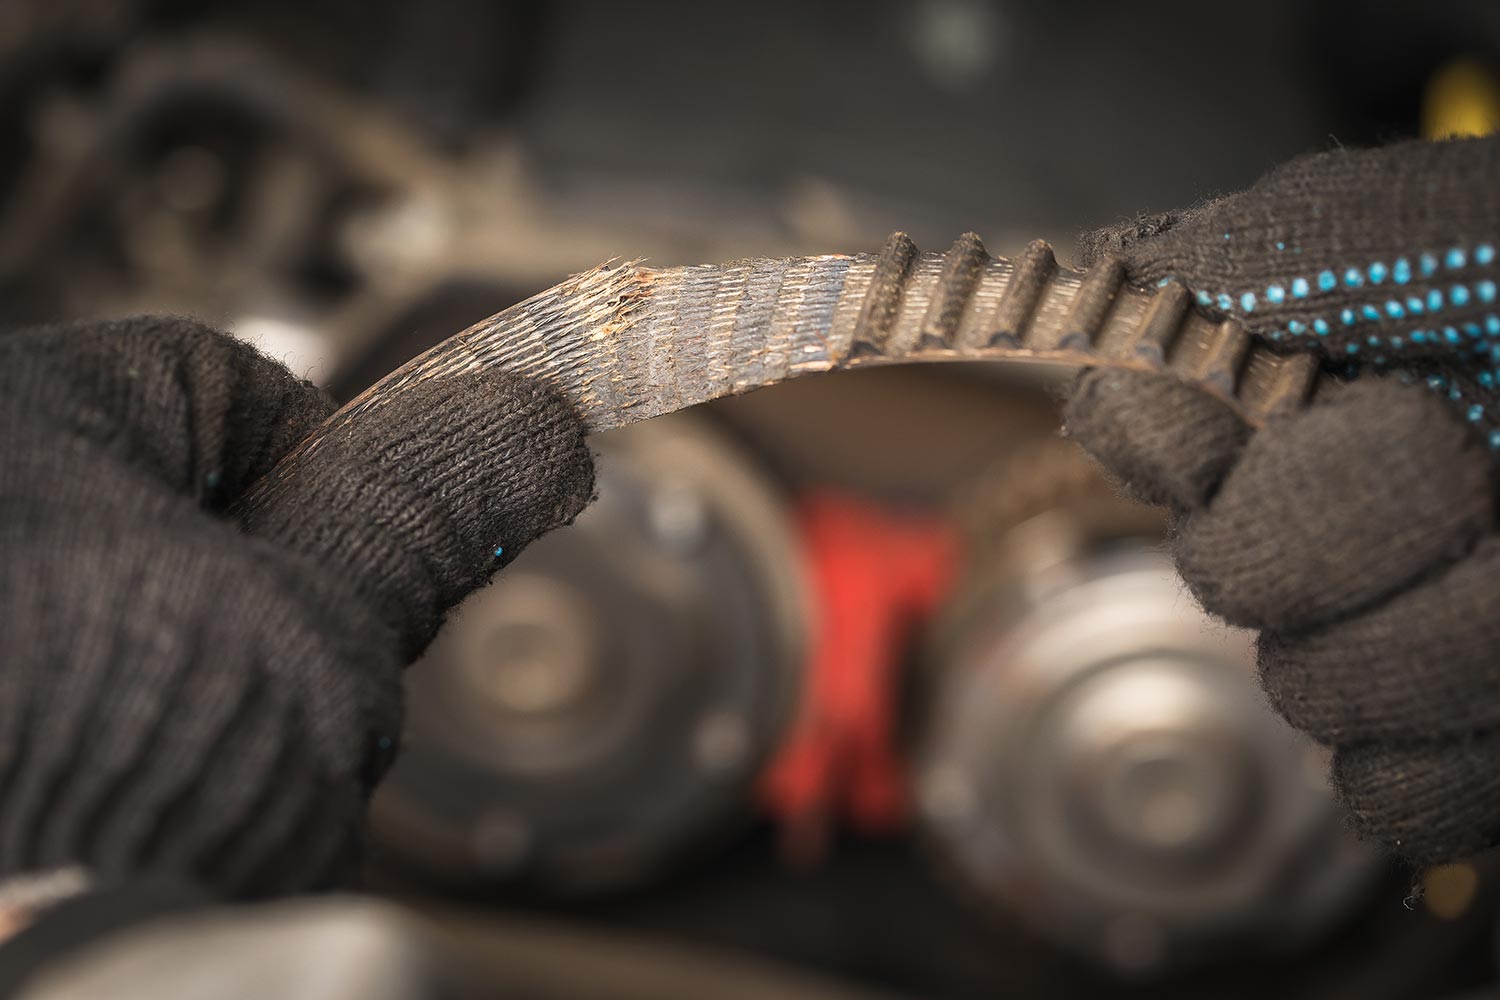 An auto mechanic removed a torn timing belt with worn teeth from a car